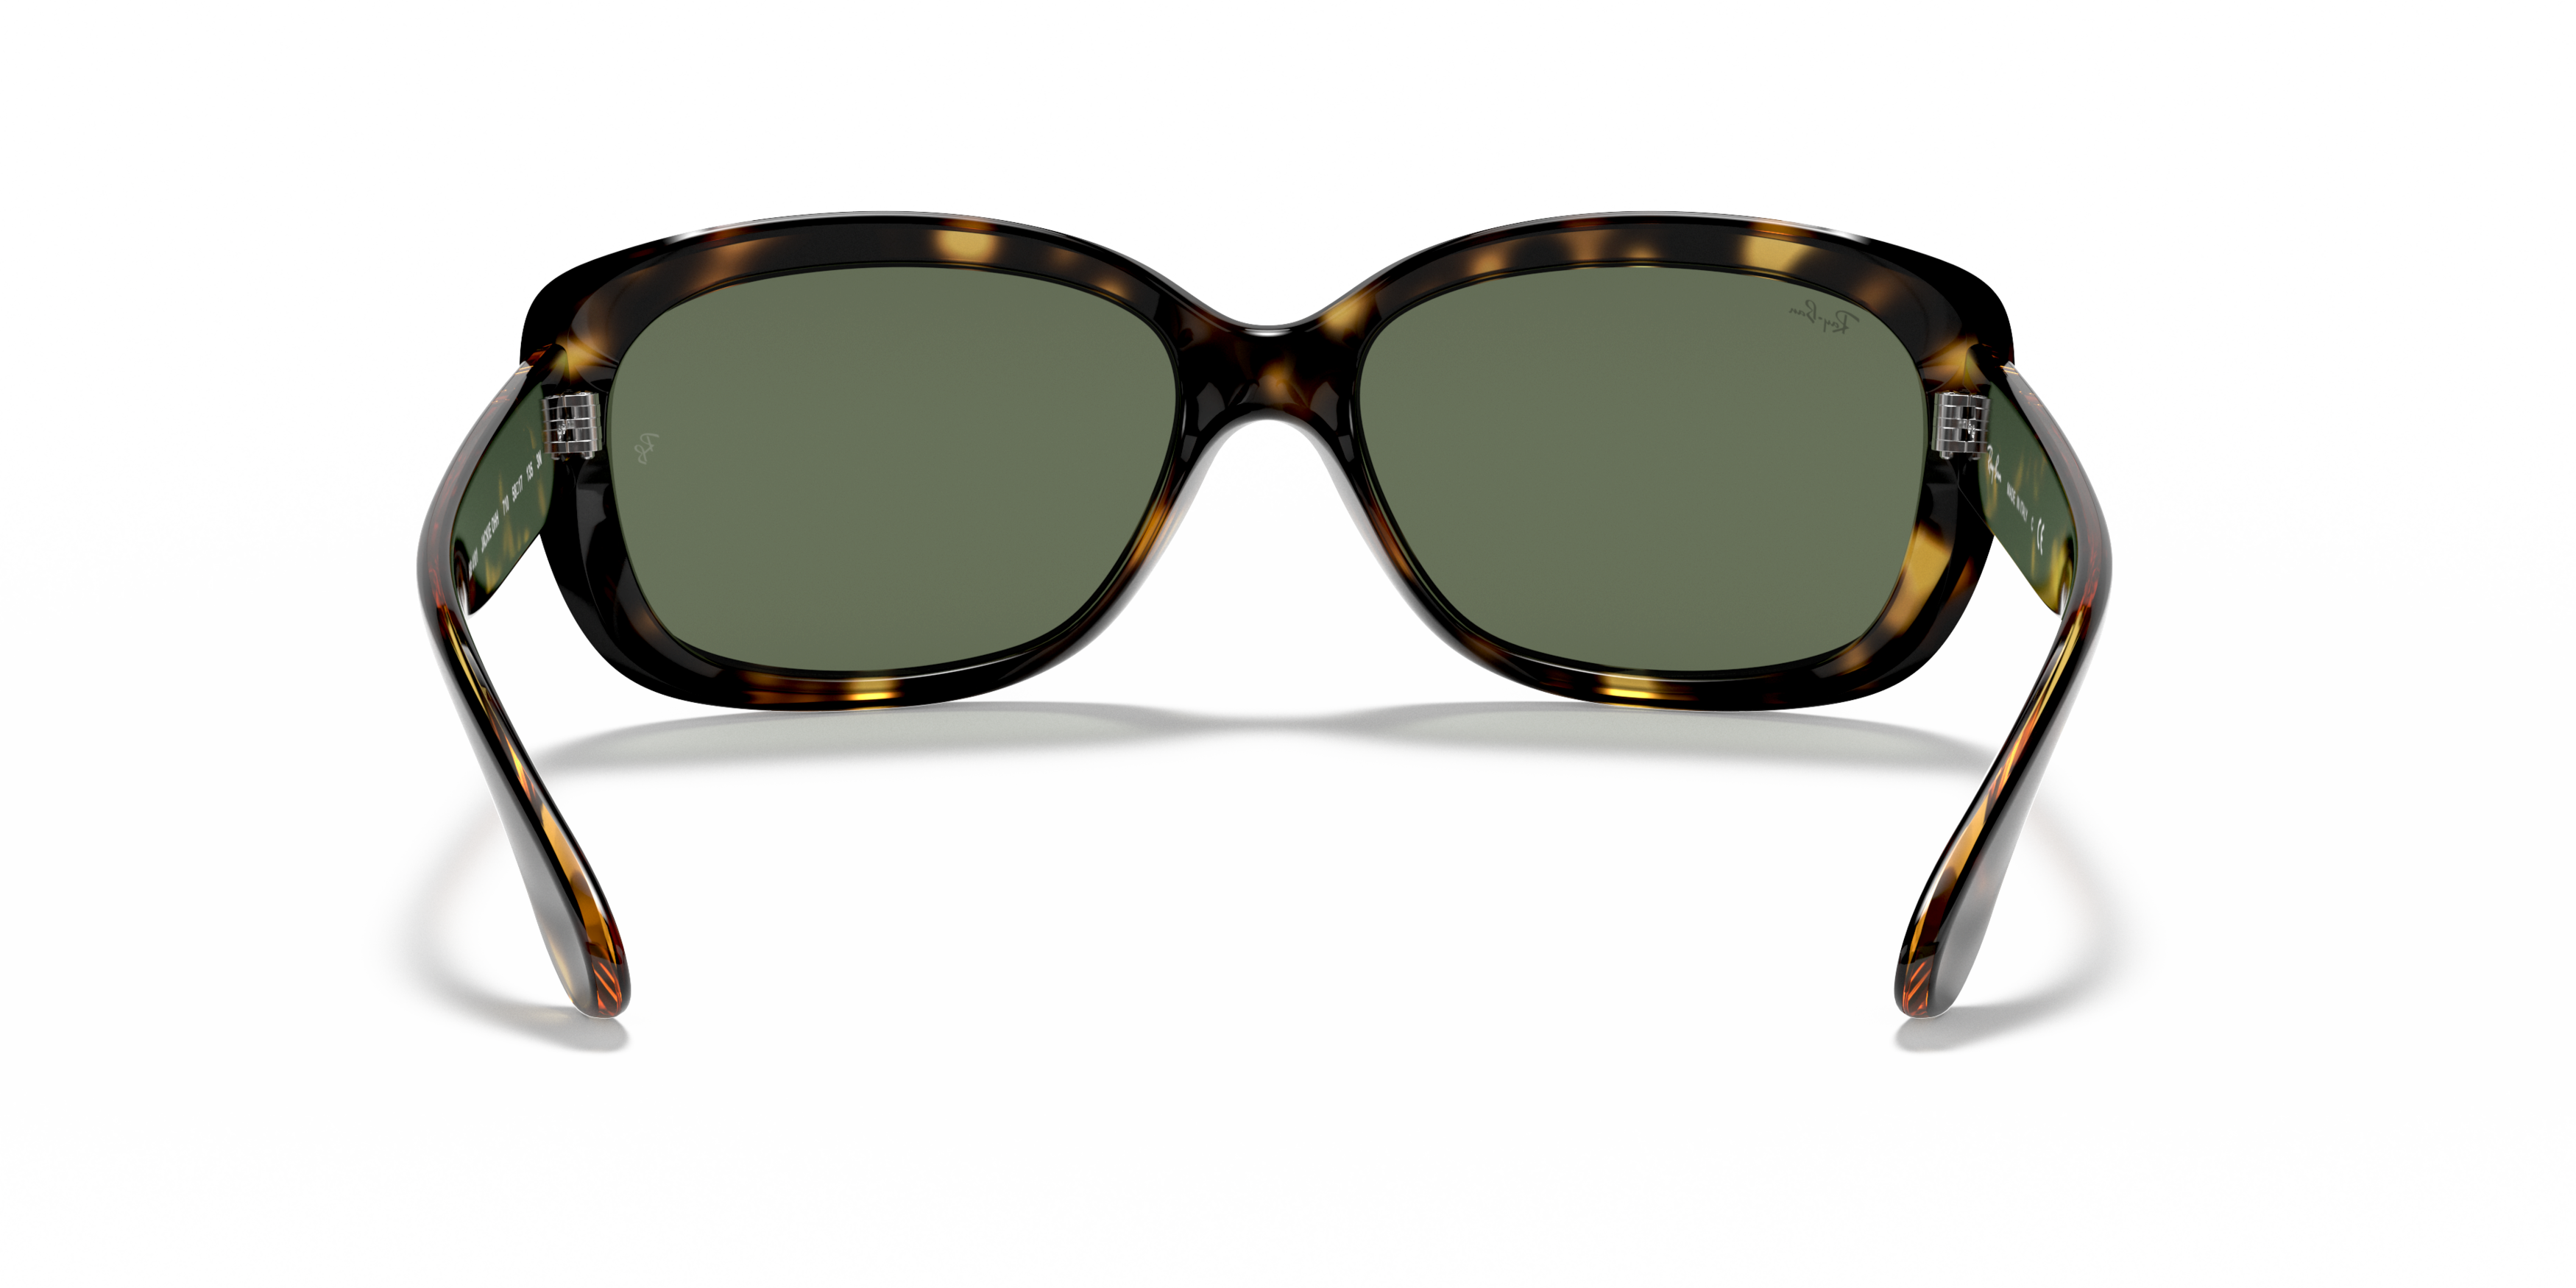 Detail02 Ray-Ban Jackie Ohh RB 4101 Sunglasses Green / Tortoise Shell